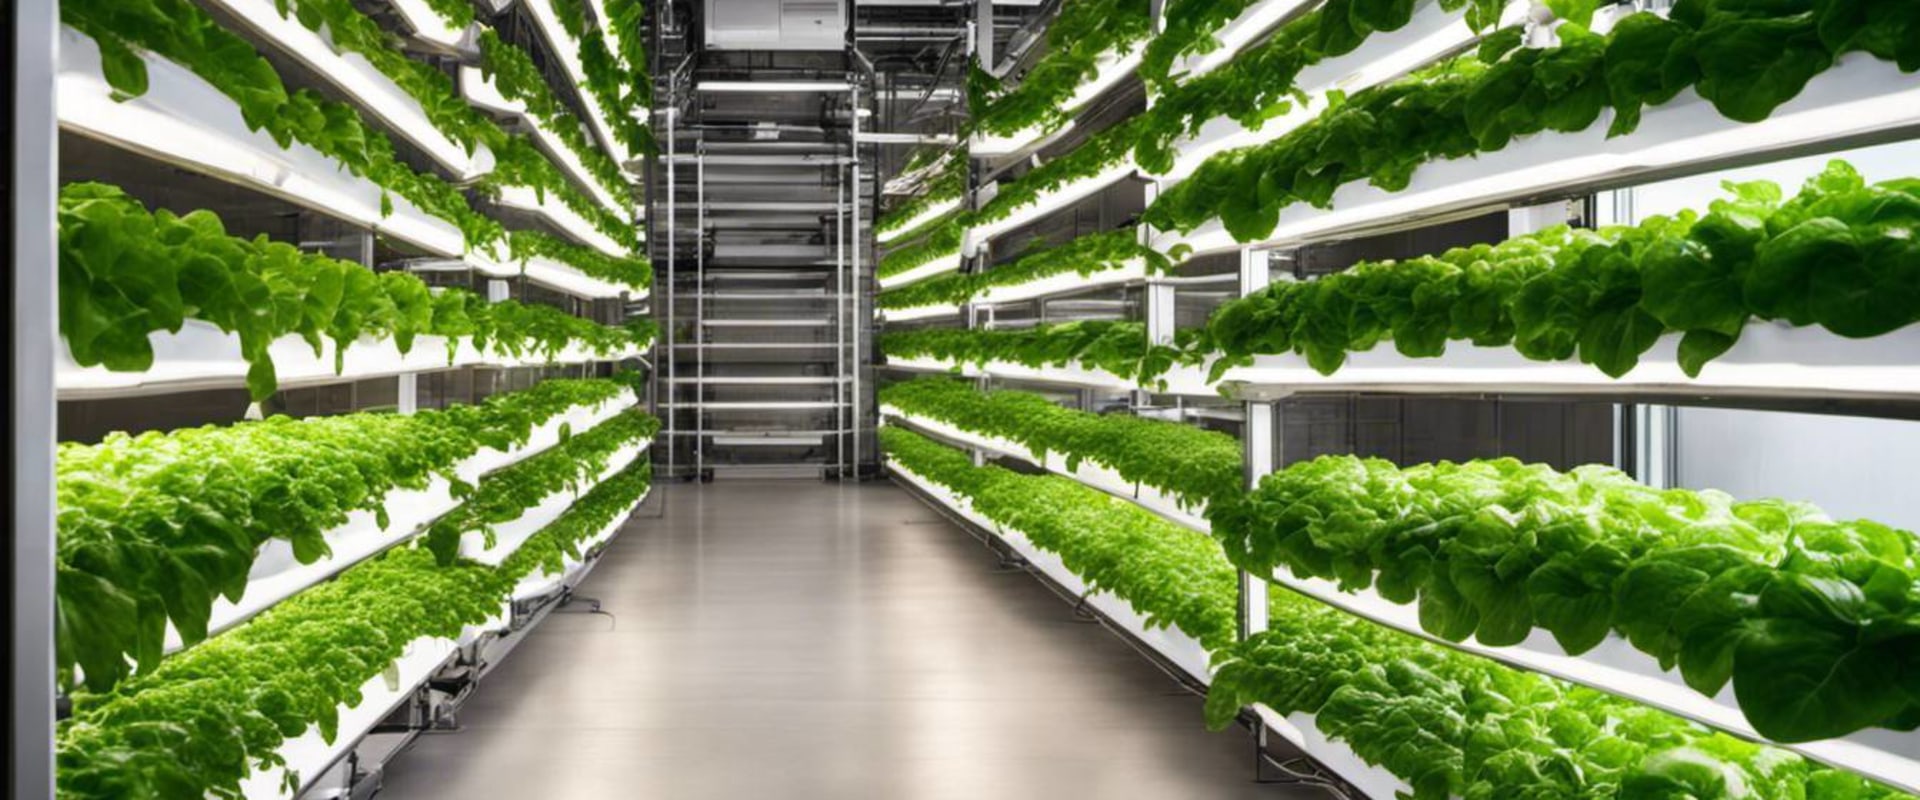 A Comprehensive Look at Commercial Hydroponic Systems